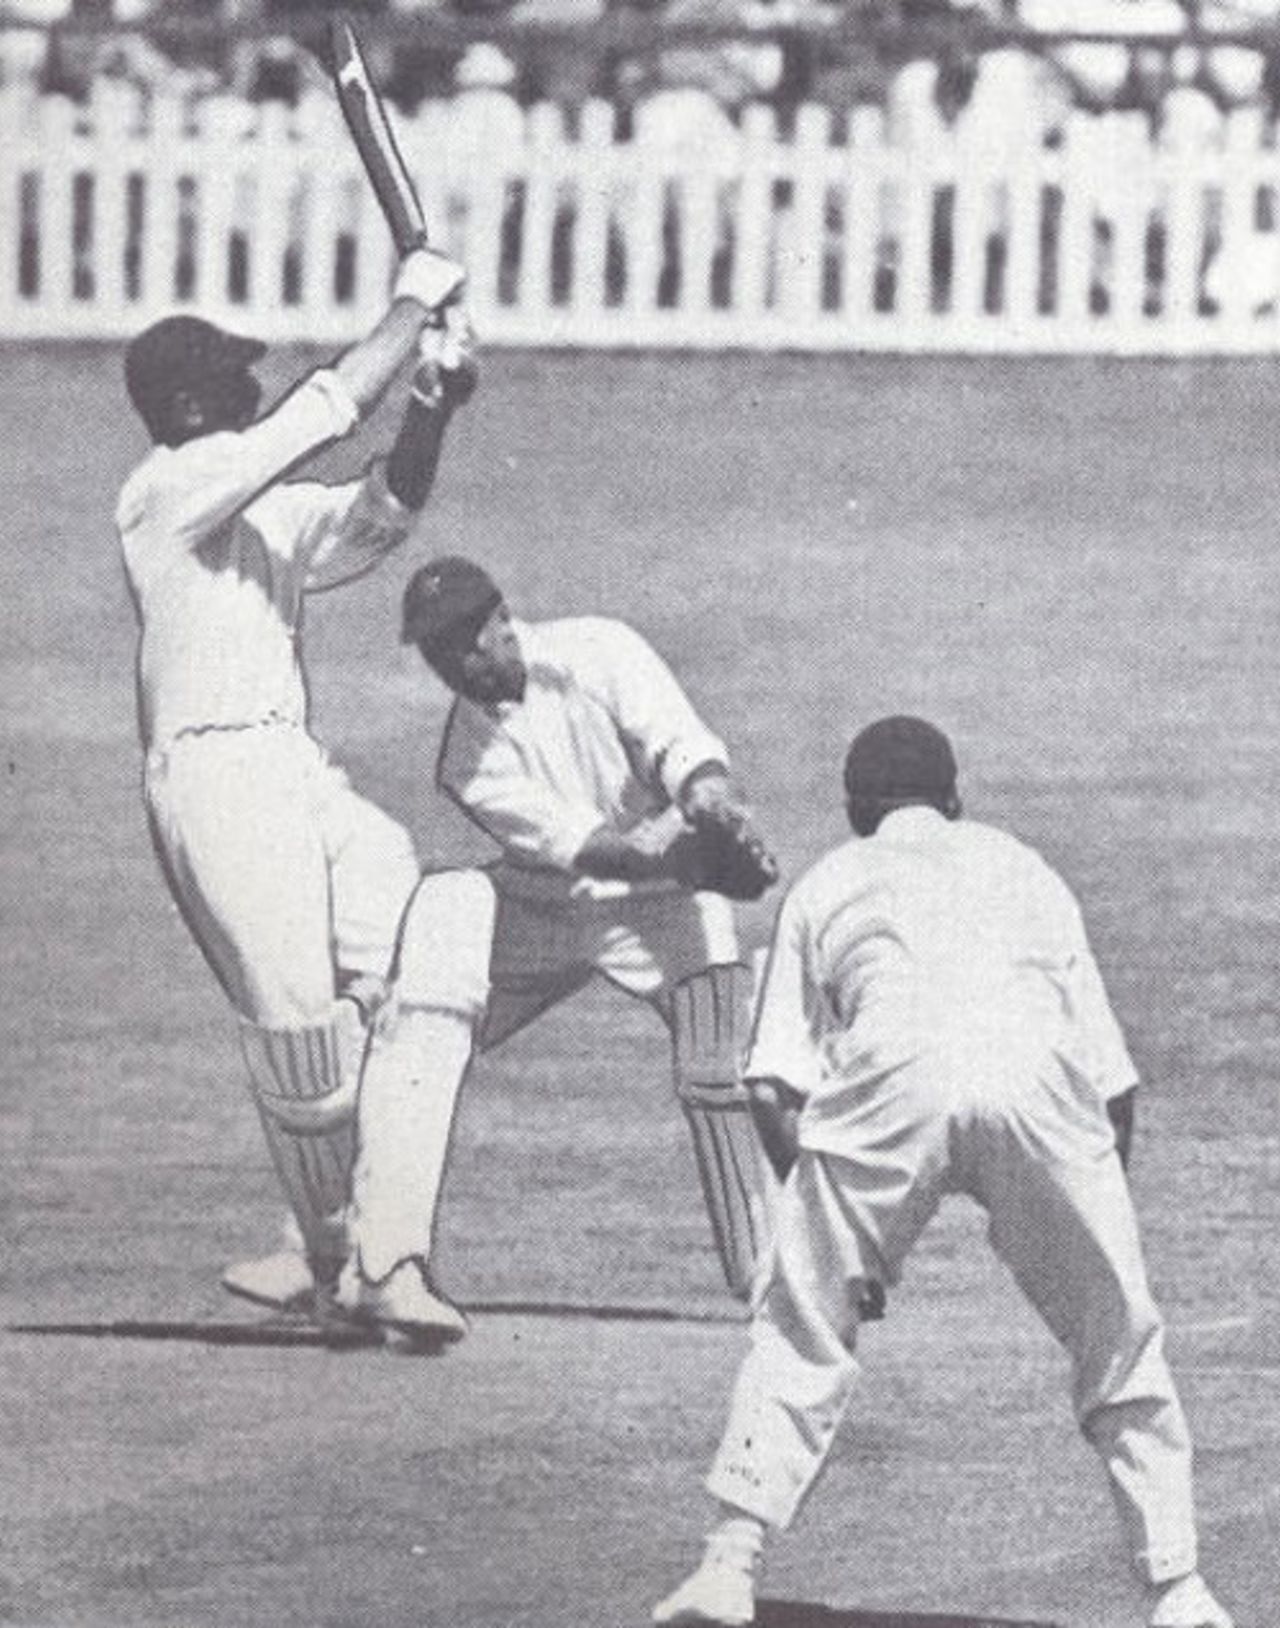 A rare attacking shot from Pieter van der Bijl in the Timeless Test. He made a first-innings hundred and was dismissed for 97 in the second innings, South Africa v England, 5th Test, Durban, March 3, 1939